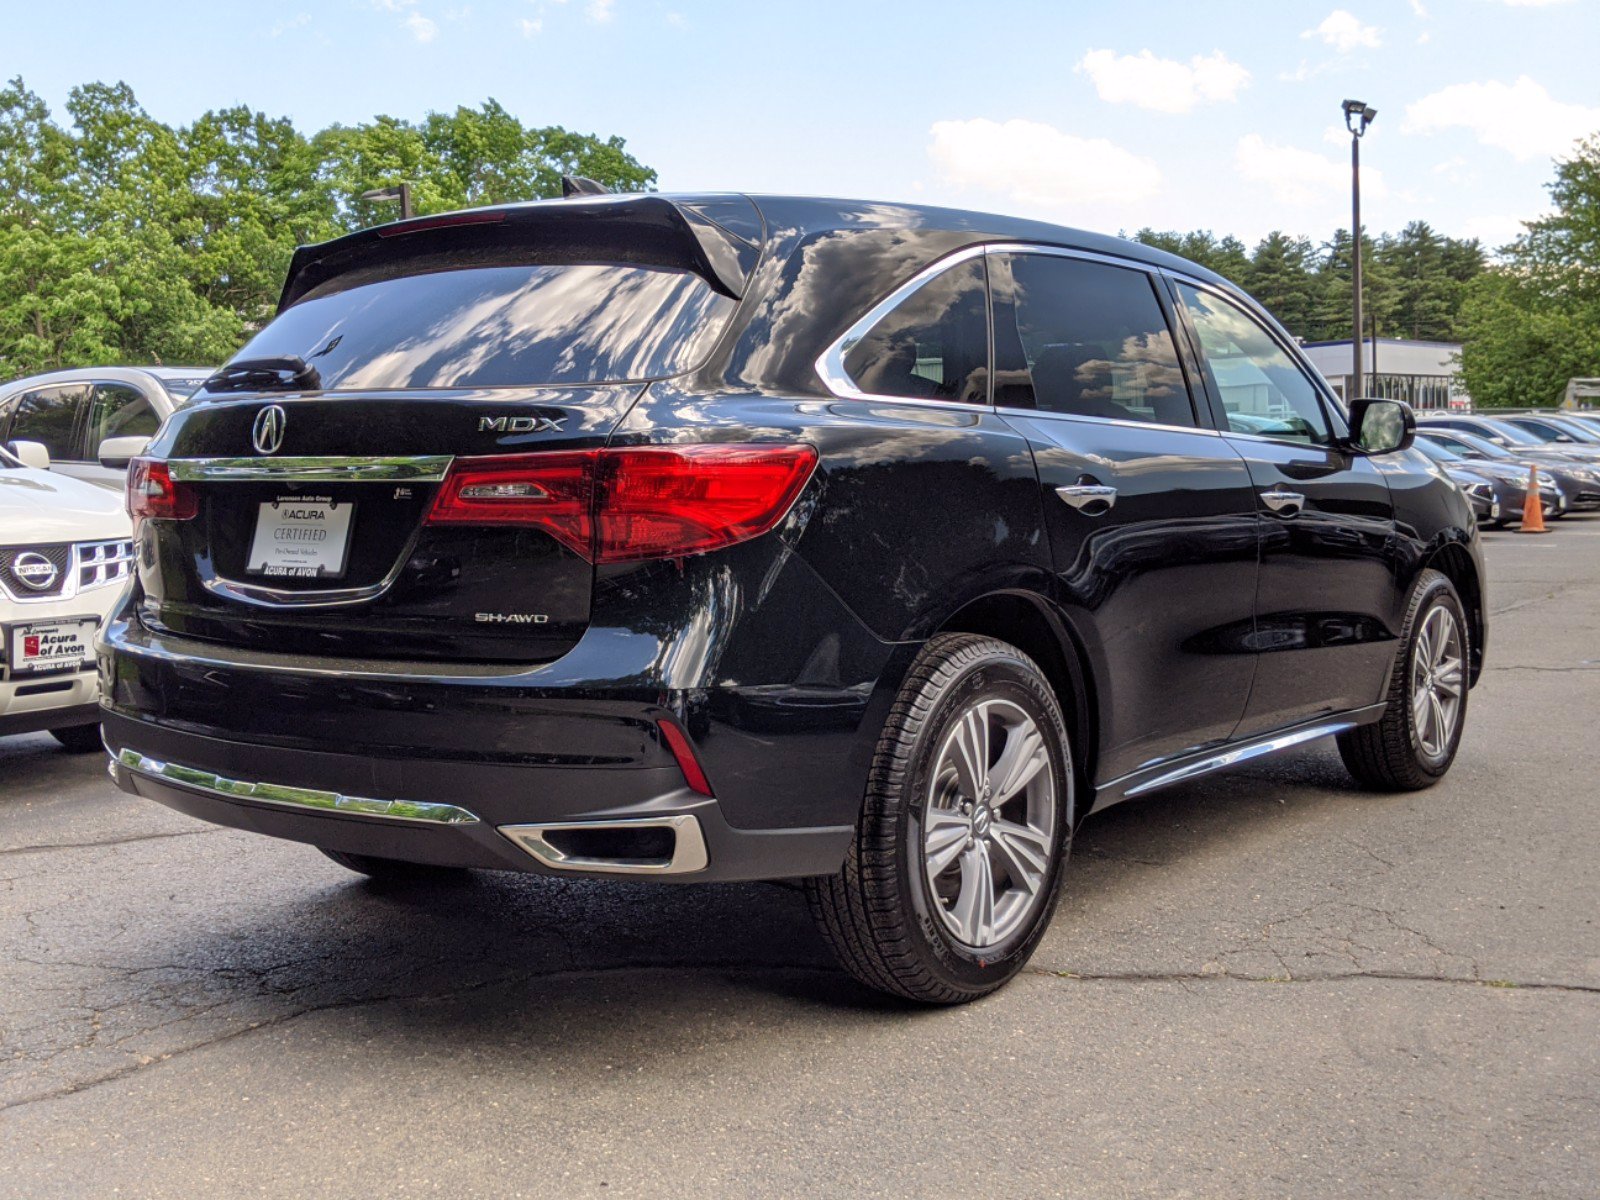 Certified PreOwned 2020 Acura MDX SHAWD 7Passenger Sport Utility in